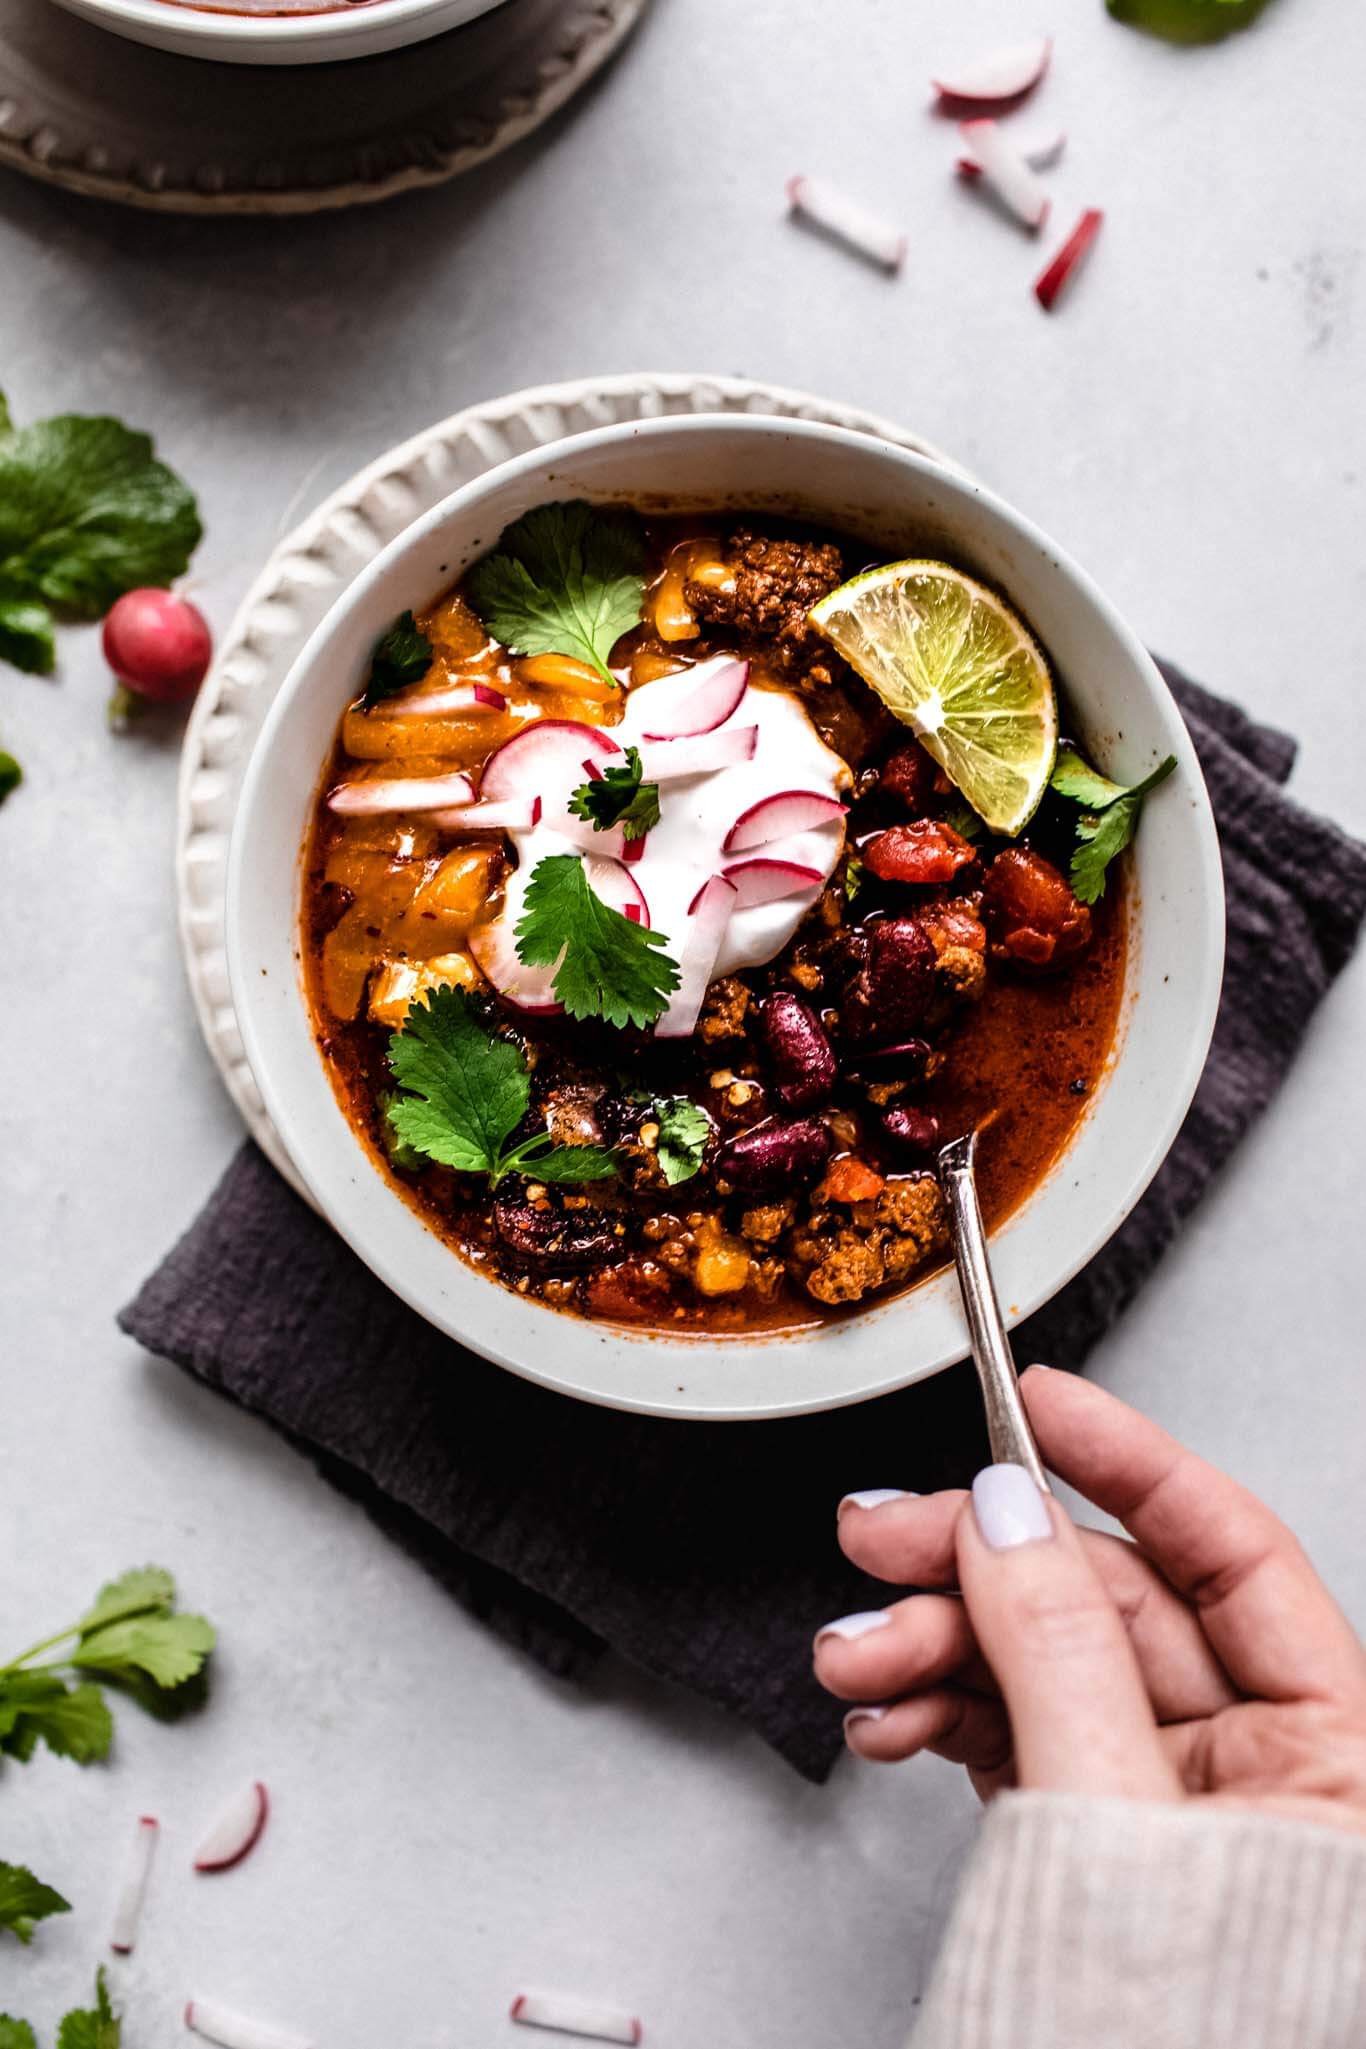 Hand holding spoon in bowl of instant pot chili.